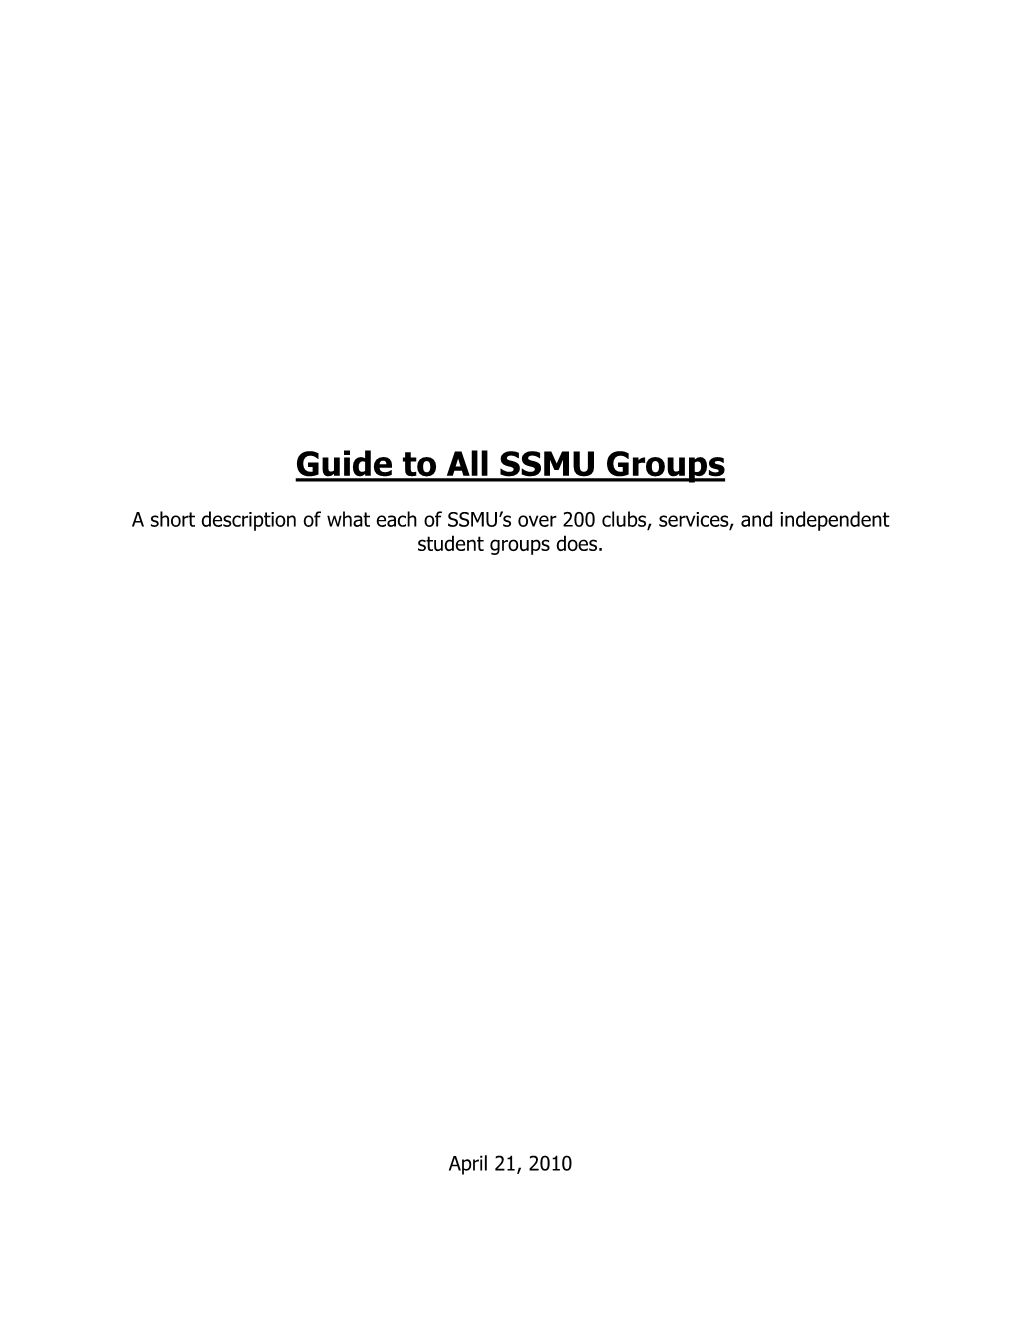 Guide to All SSMU Groups